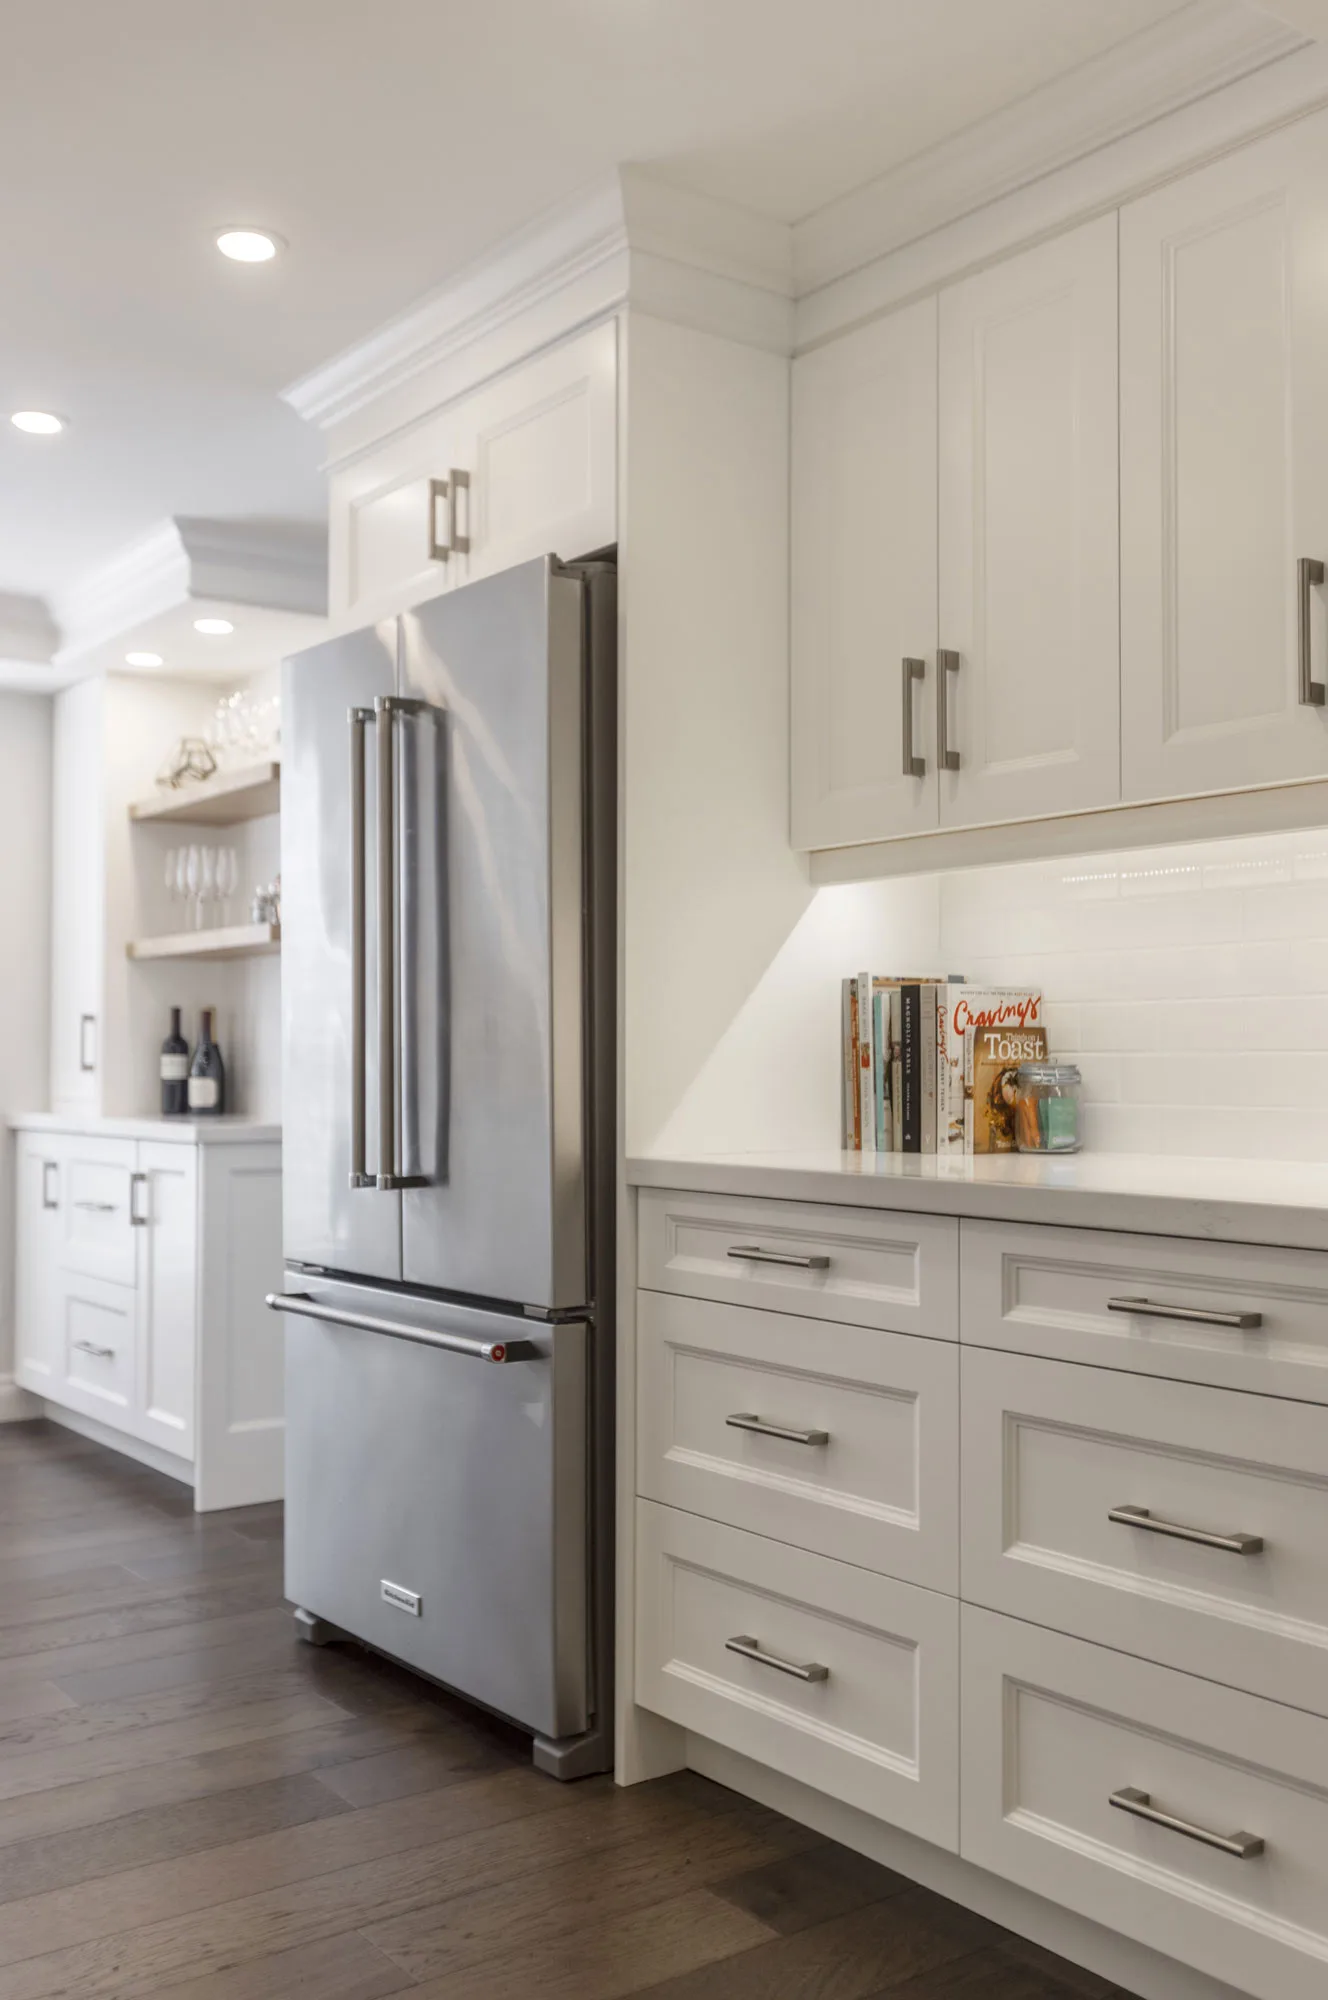 A kitchen with white cupboards with silver handles with a stainless steel fridge